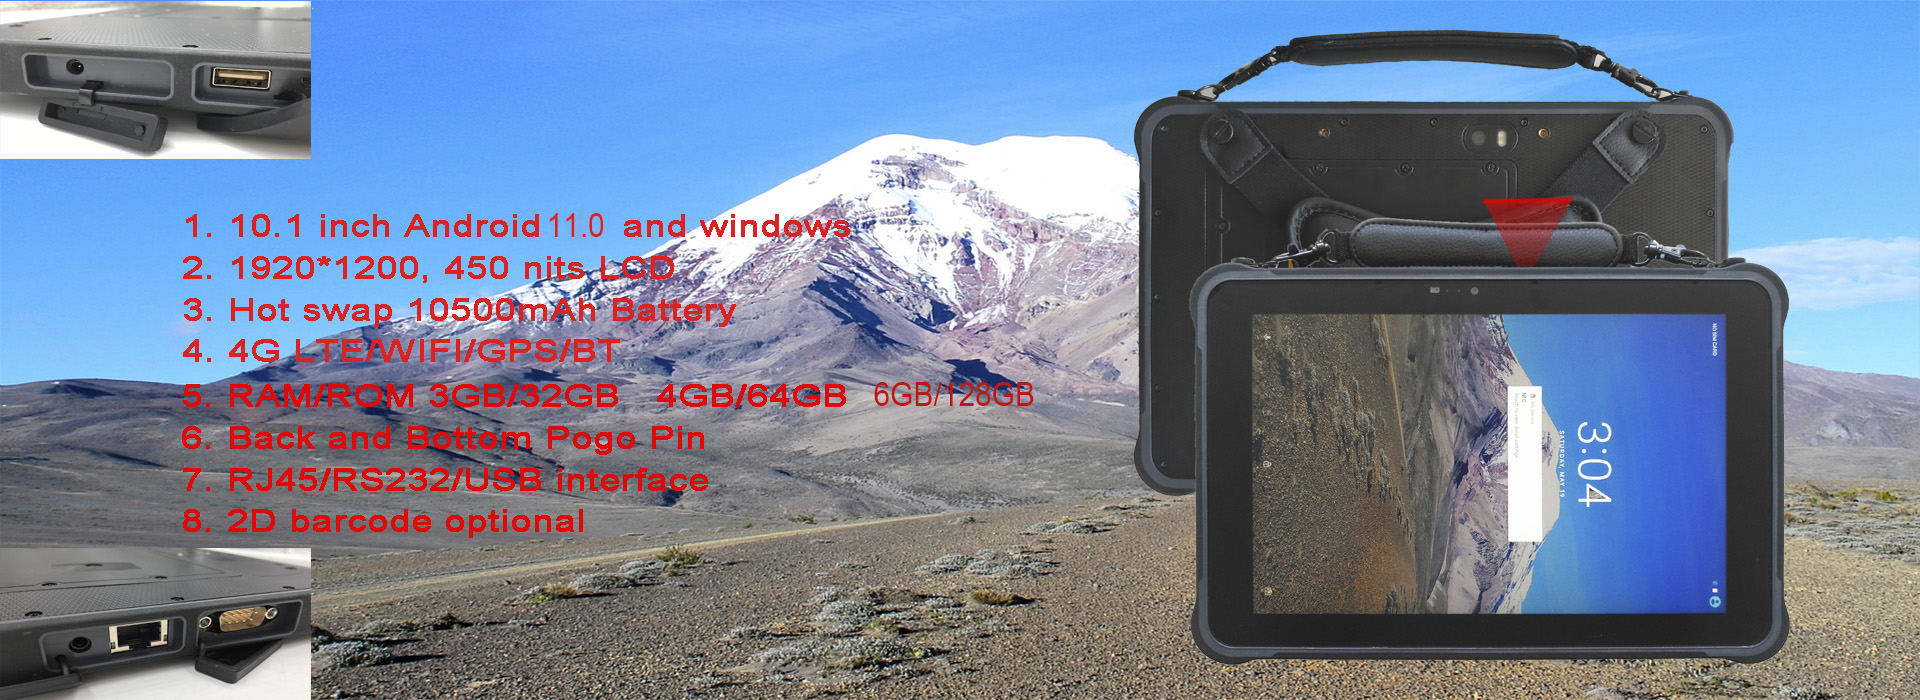 sunshine readable 10.1 inch hot swap android 11.0  rugged tablet 